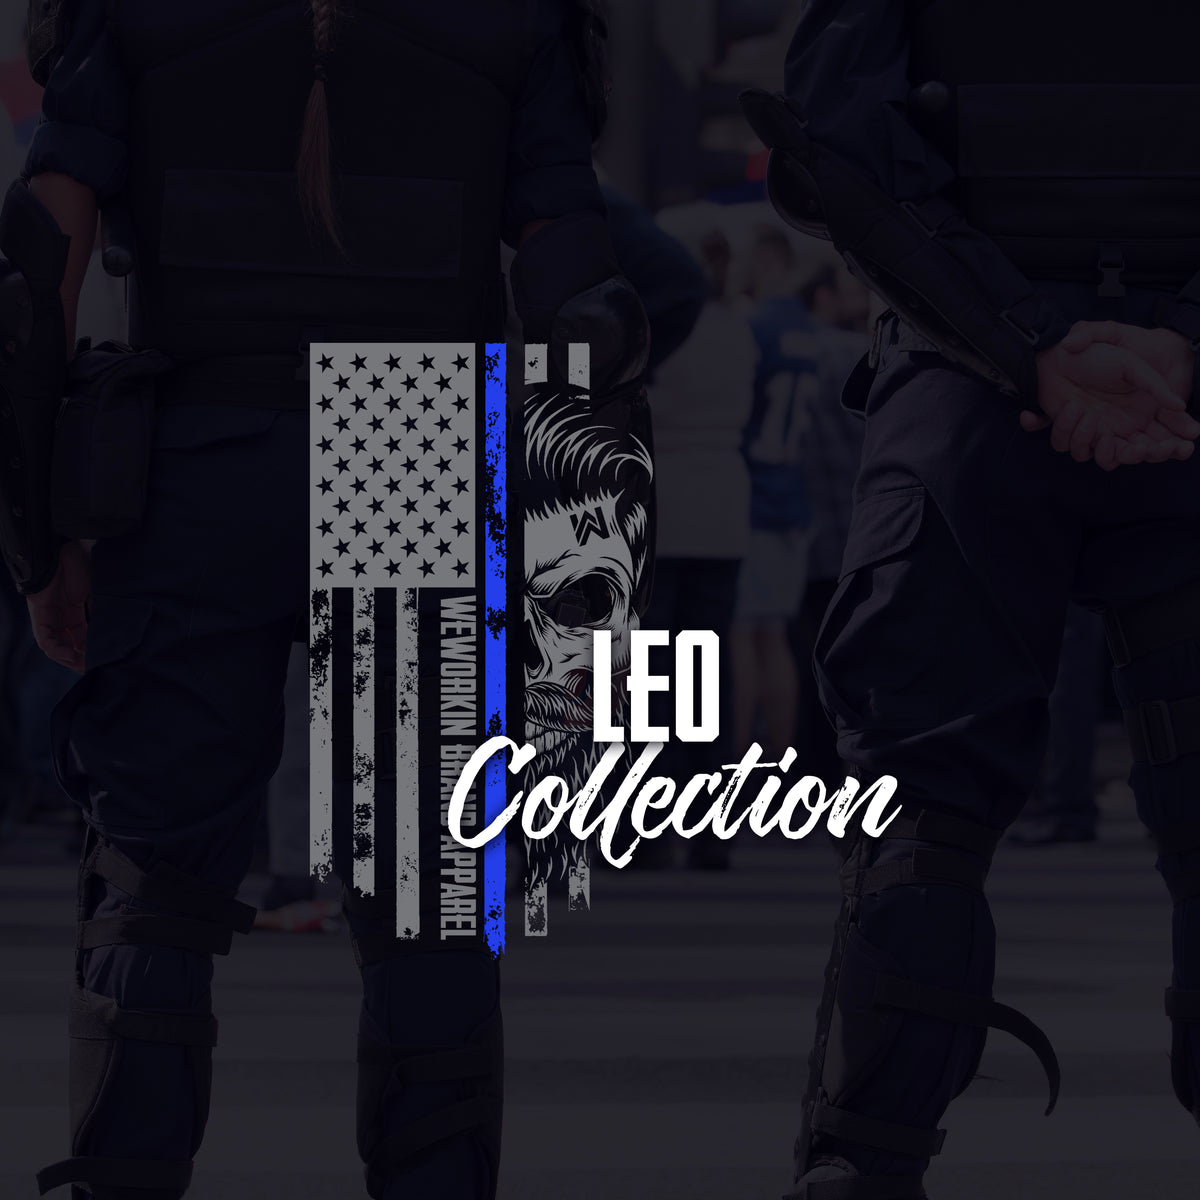 LEO COLLECTION. Thin Blue Line Flag and police